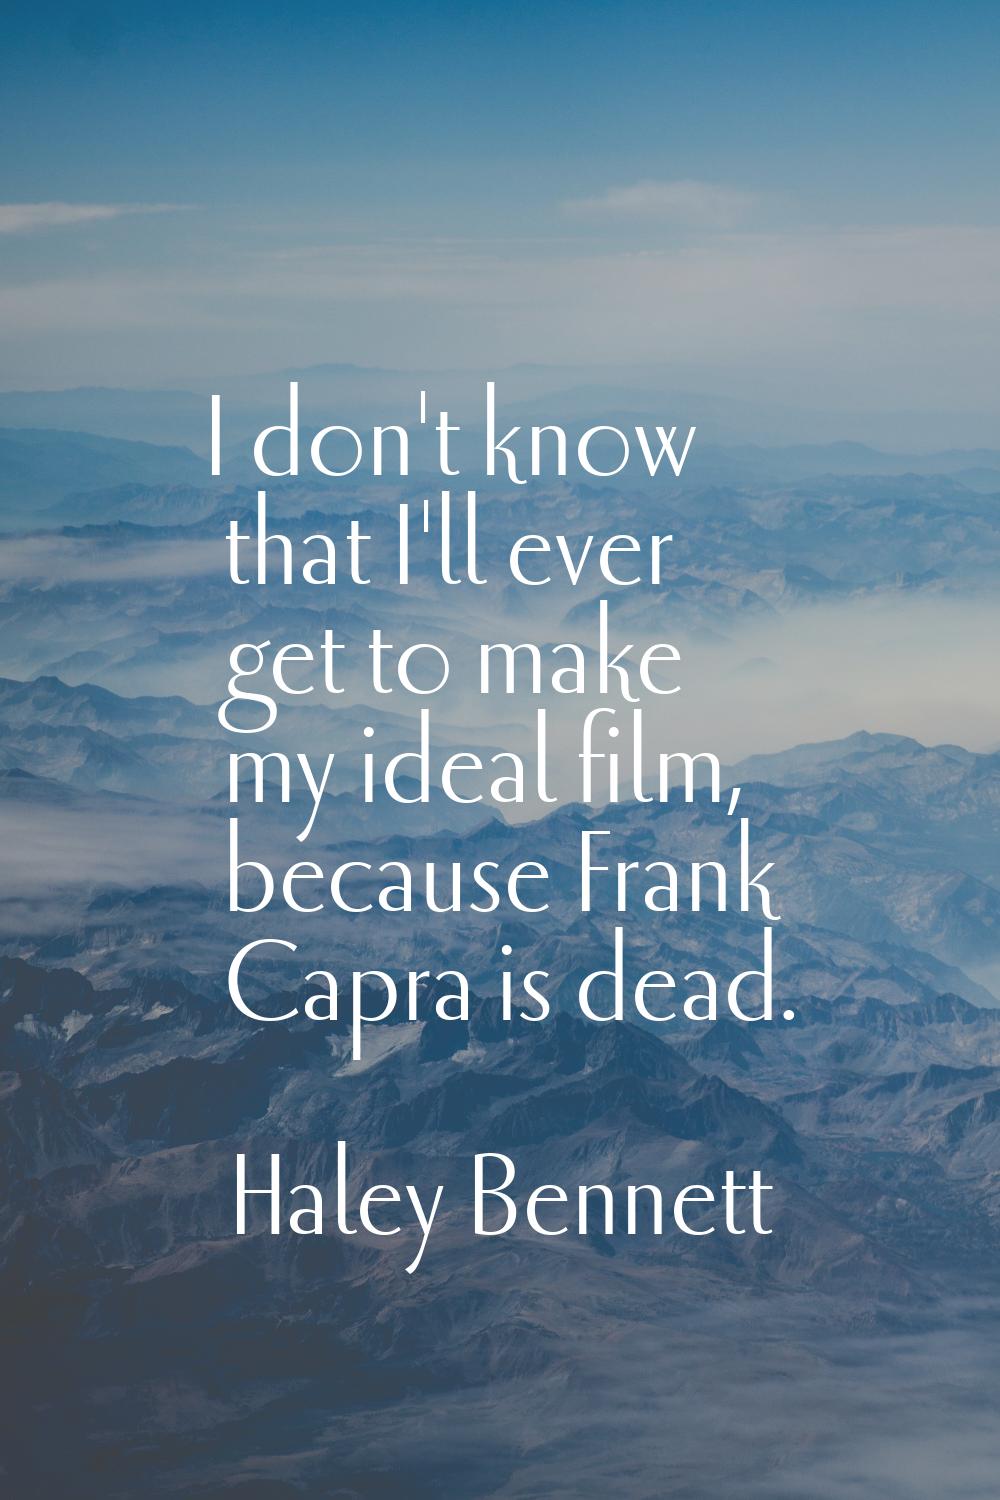 I don't know that I'll ever get to make my ideal film, because Frank Capra is dead.